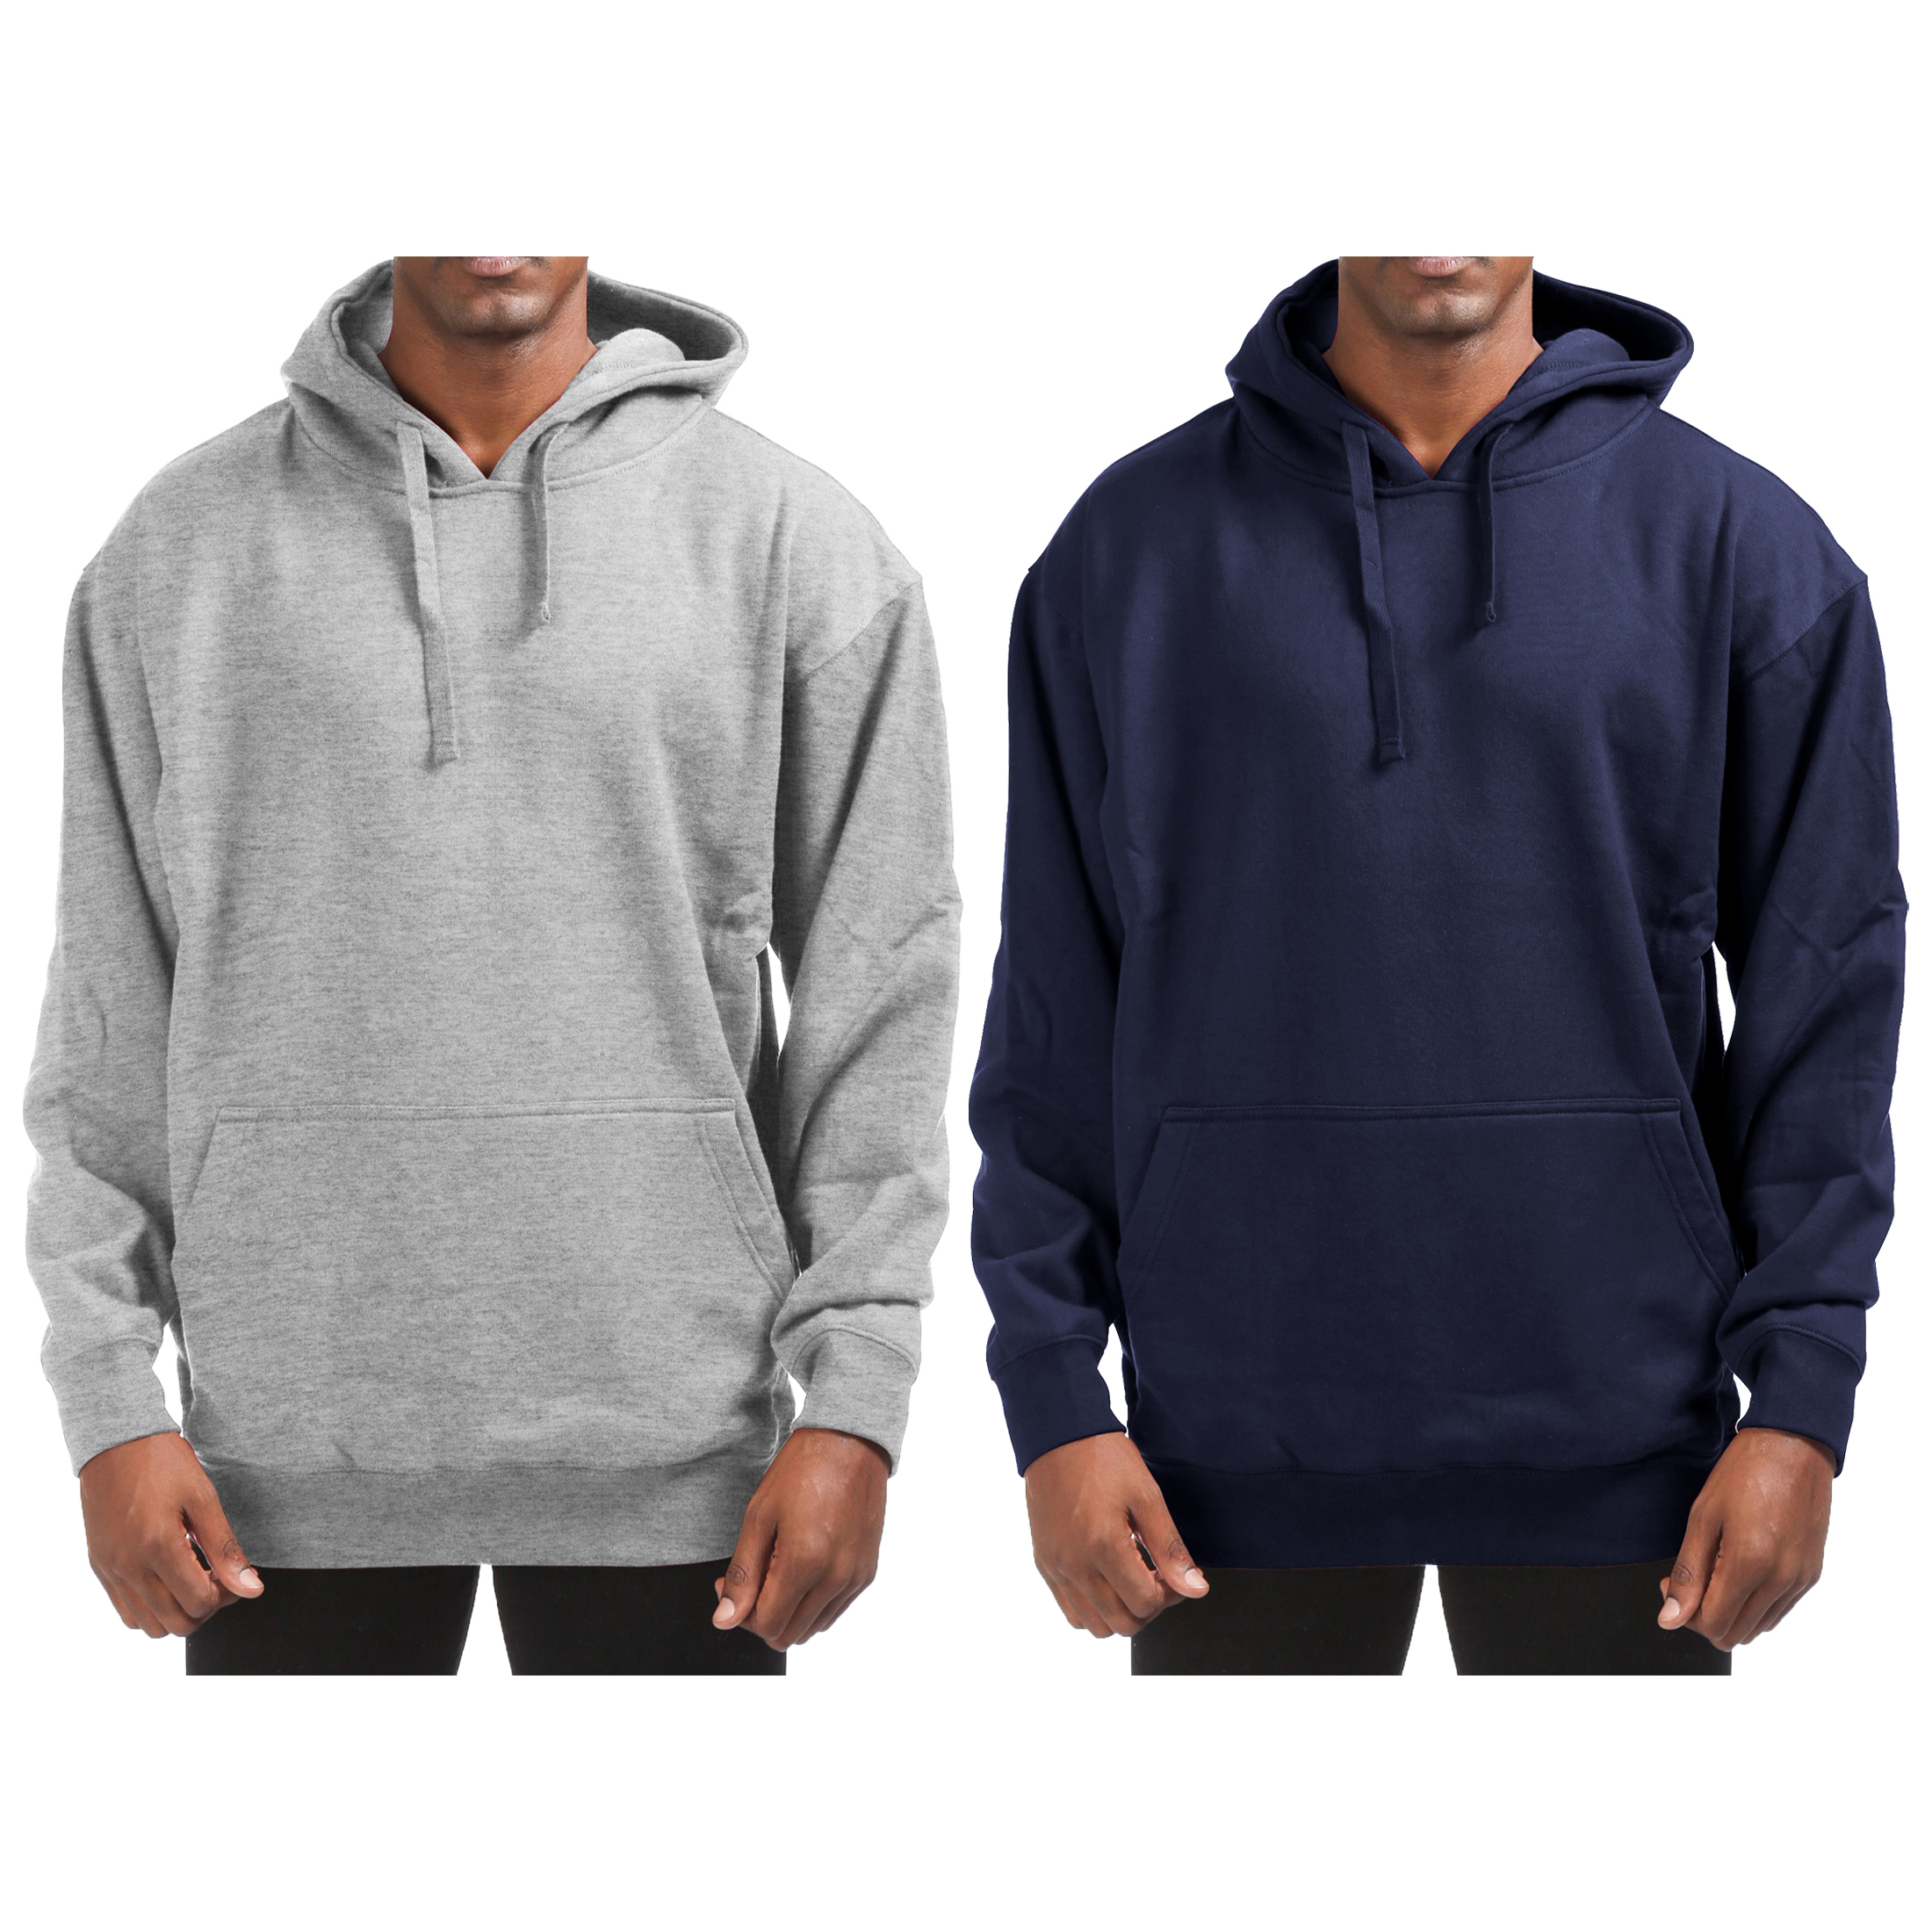 1-PACK Men's Cotton-Blend Fleece Pullover Hoodie With Pocket - M